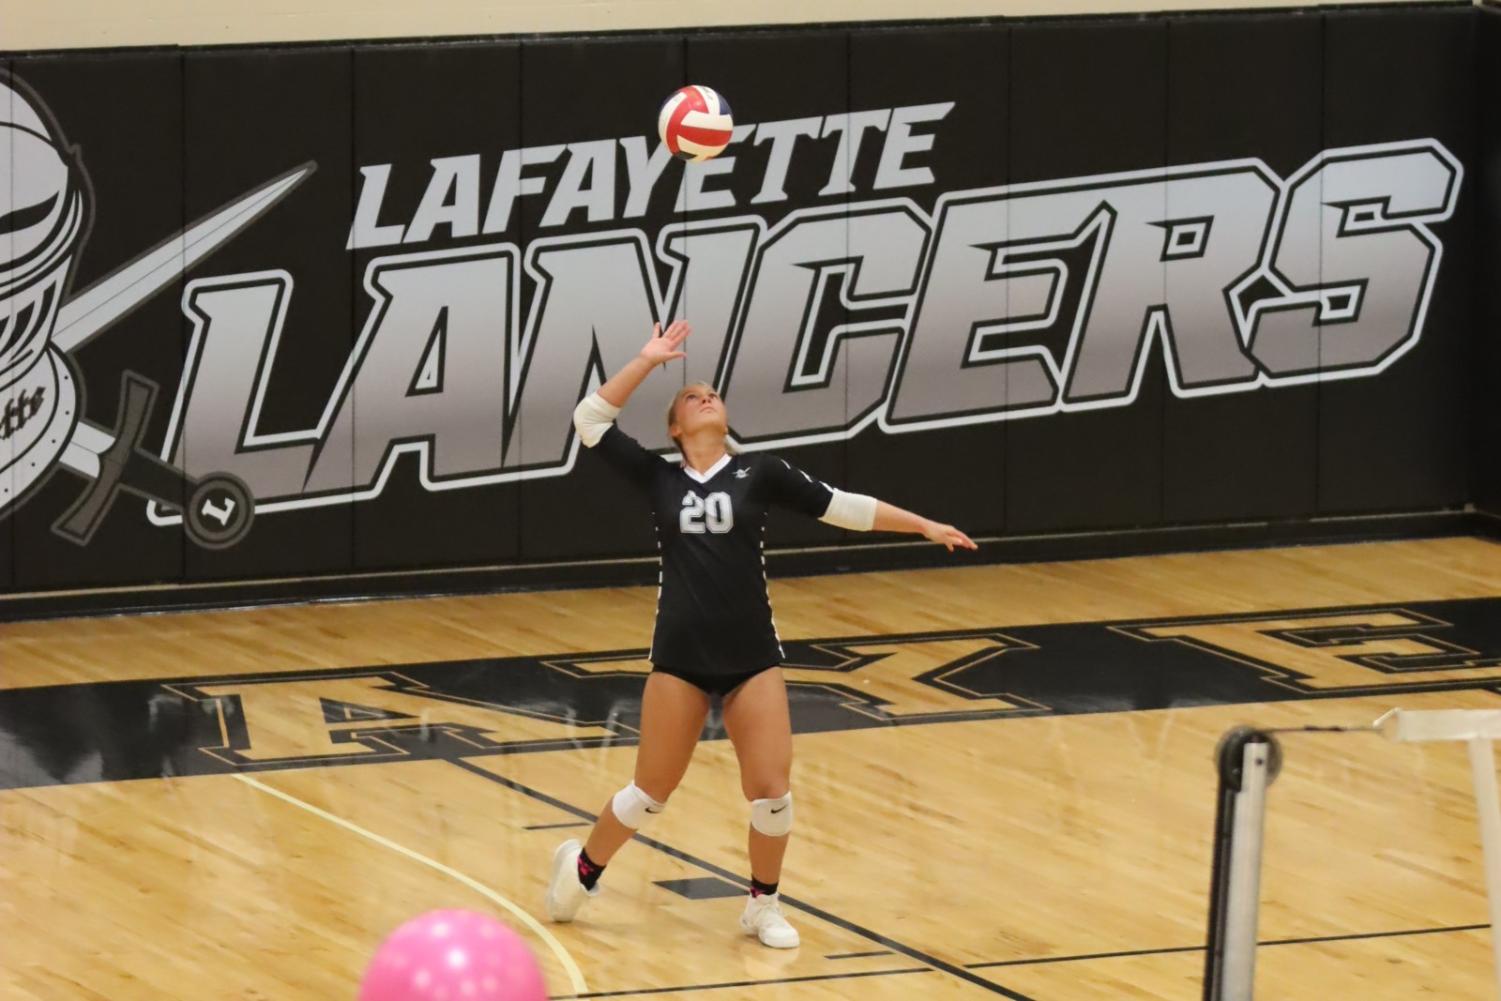 During the game on Sept. 16, senior Audrey Savacool spikes the ball to the other side during a volley. The game was the Chris Toomey memorial game, which was played in honor of the former coach who passed away over the summer. 